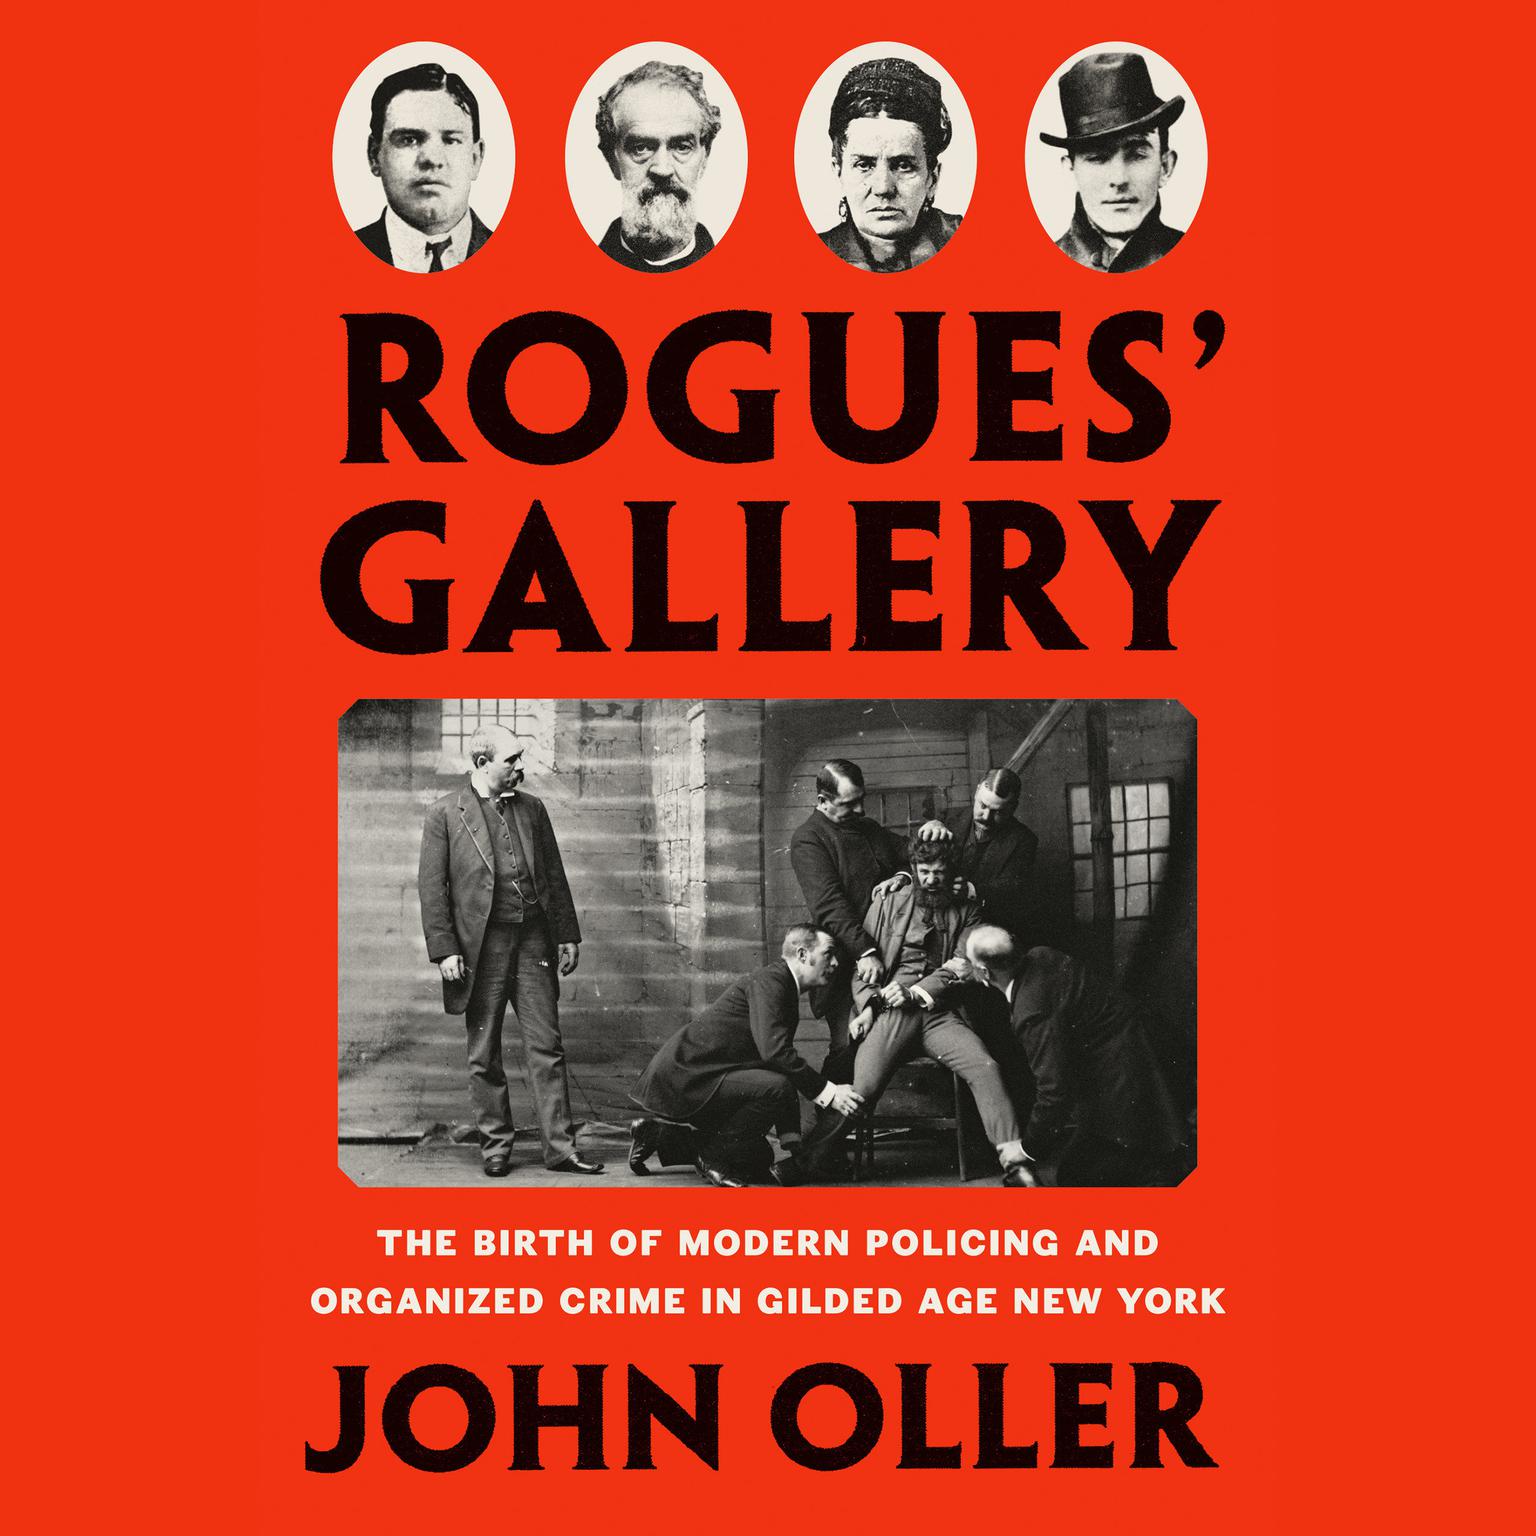 Rogues Gallery: The Birth of Modern Policing and Organized Crime in Gilded Age New York Audiobook, by John Oller